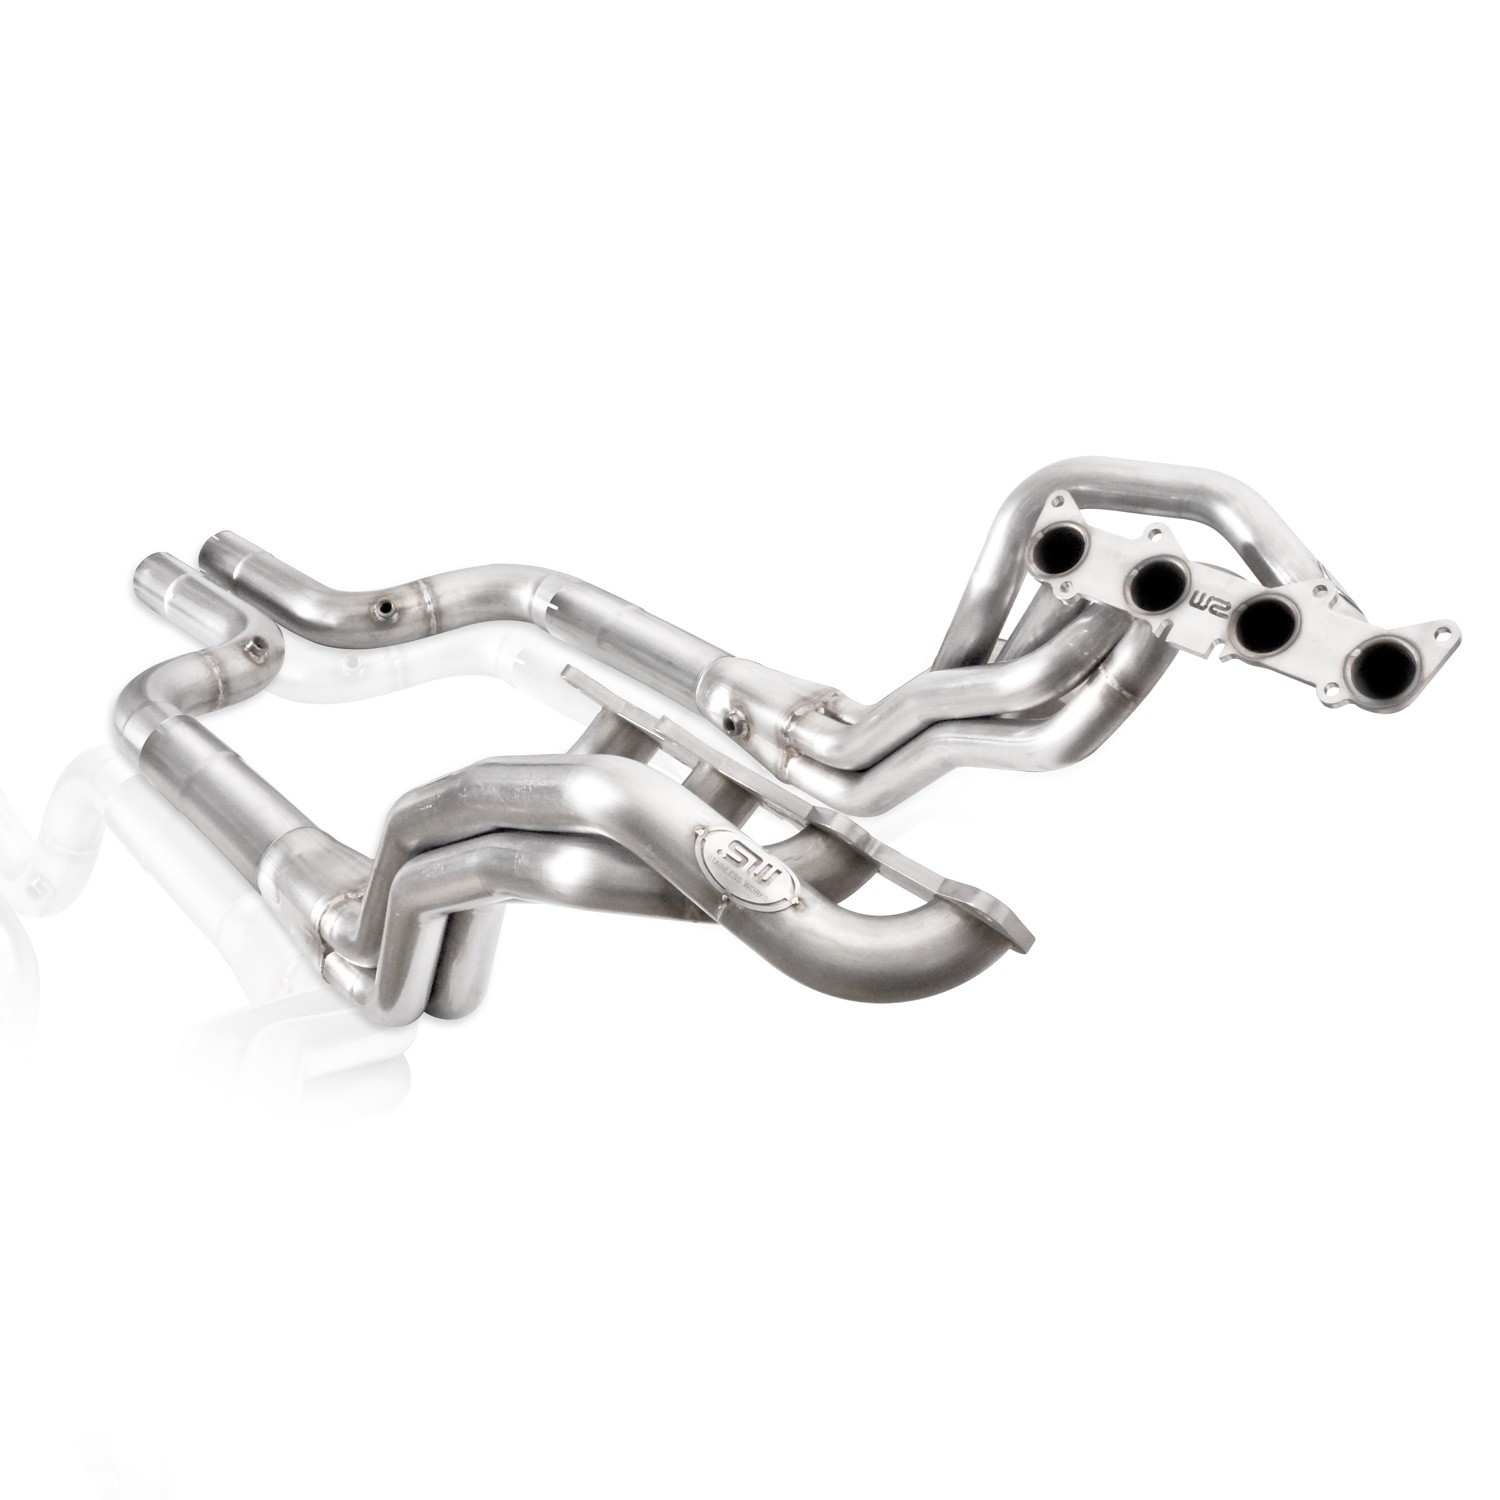 2015+ Ford Mustang GT 5.0L V8 Stainless Works 1 7/8" Long Tube Headers w/Offroad Pipes - Aftermarket Connection